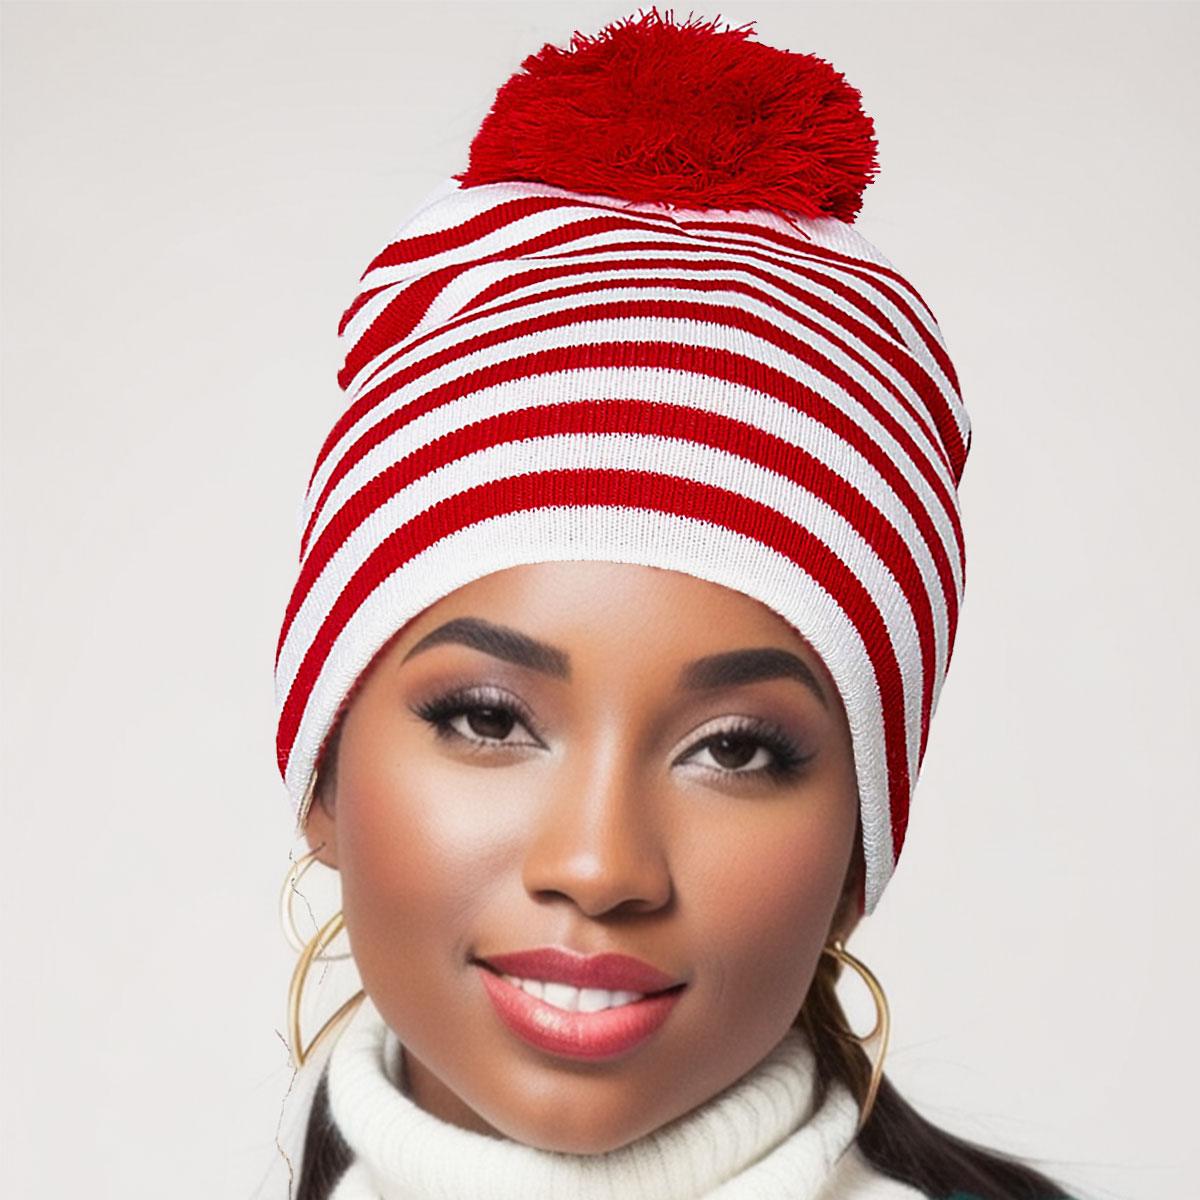 Cozy up in Style: Women's Candy Stripe Pom Beanie – Perfect for Chilly Days!